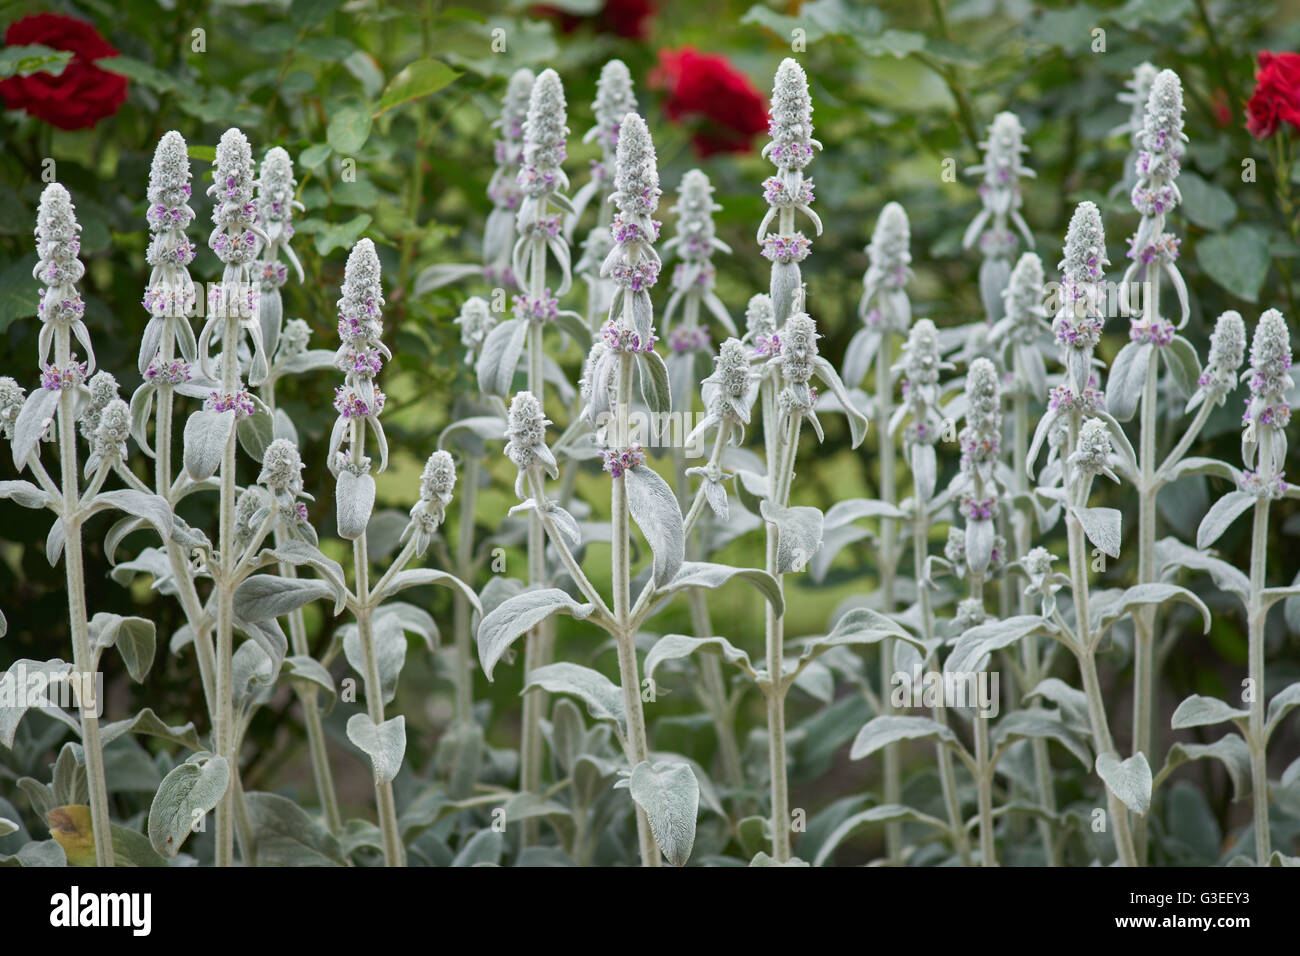 Lamb's ears in full bloom blooming Stachys byzantina Stock Photo